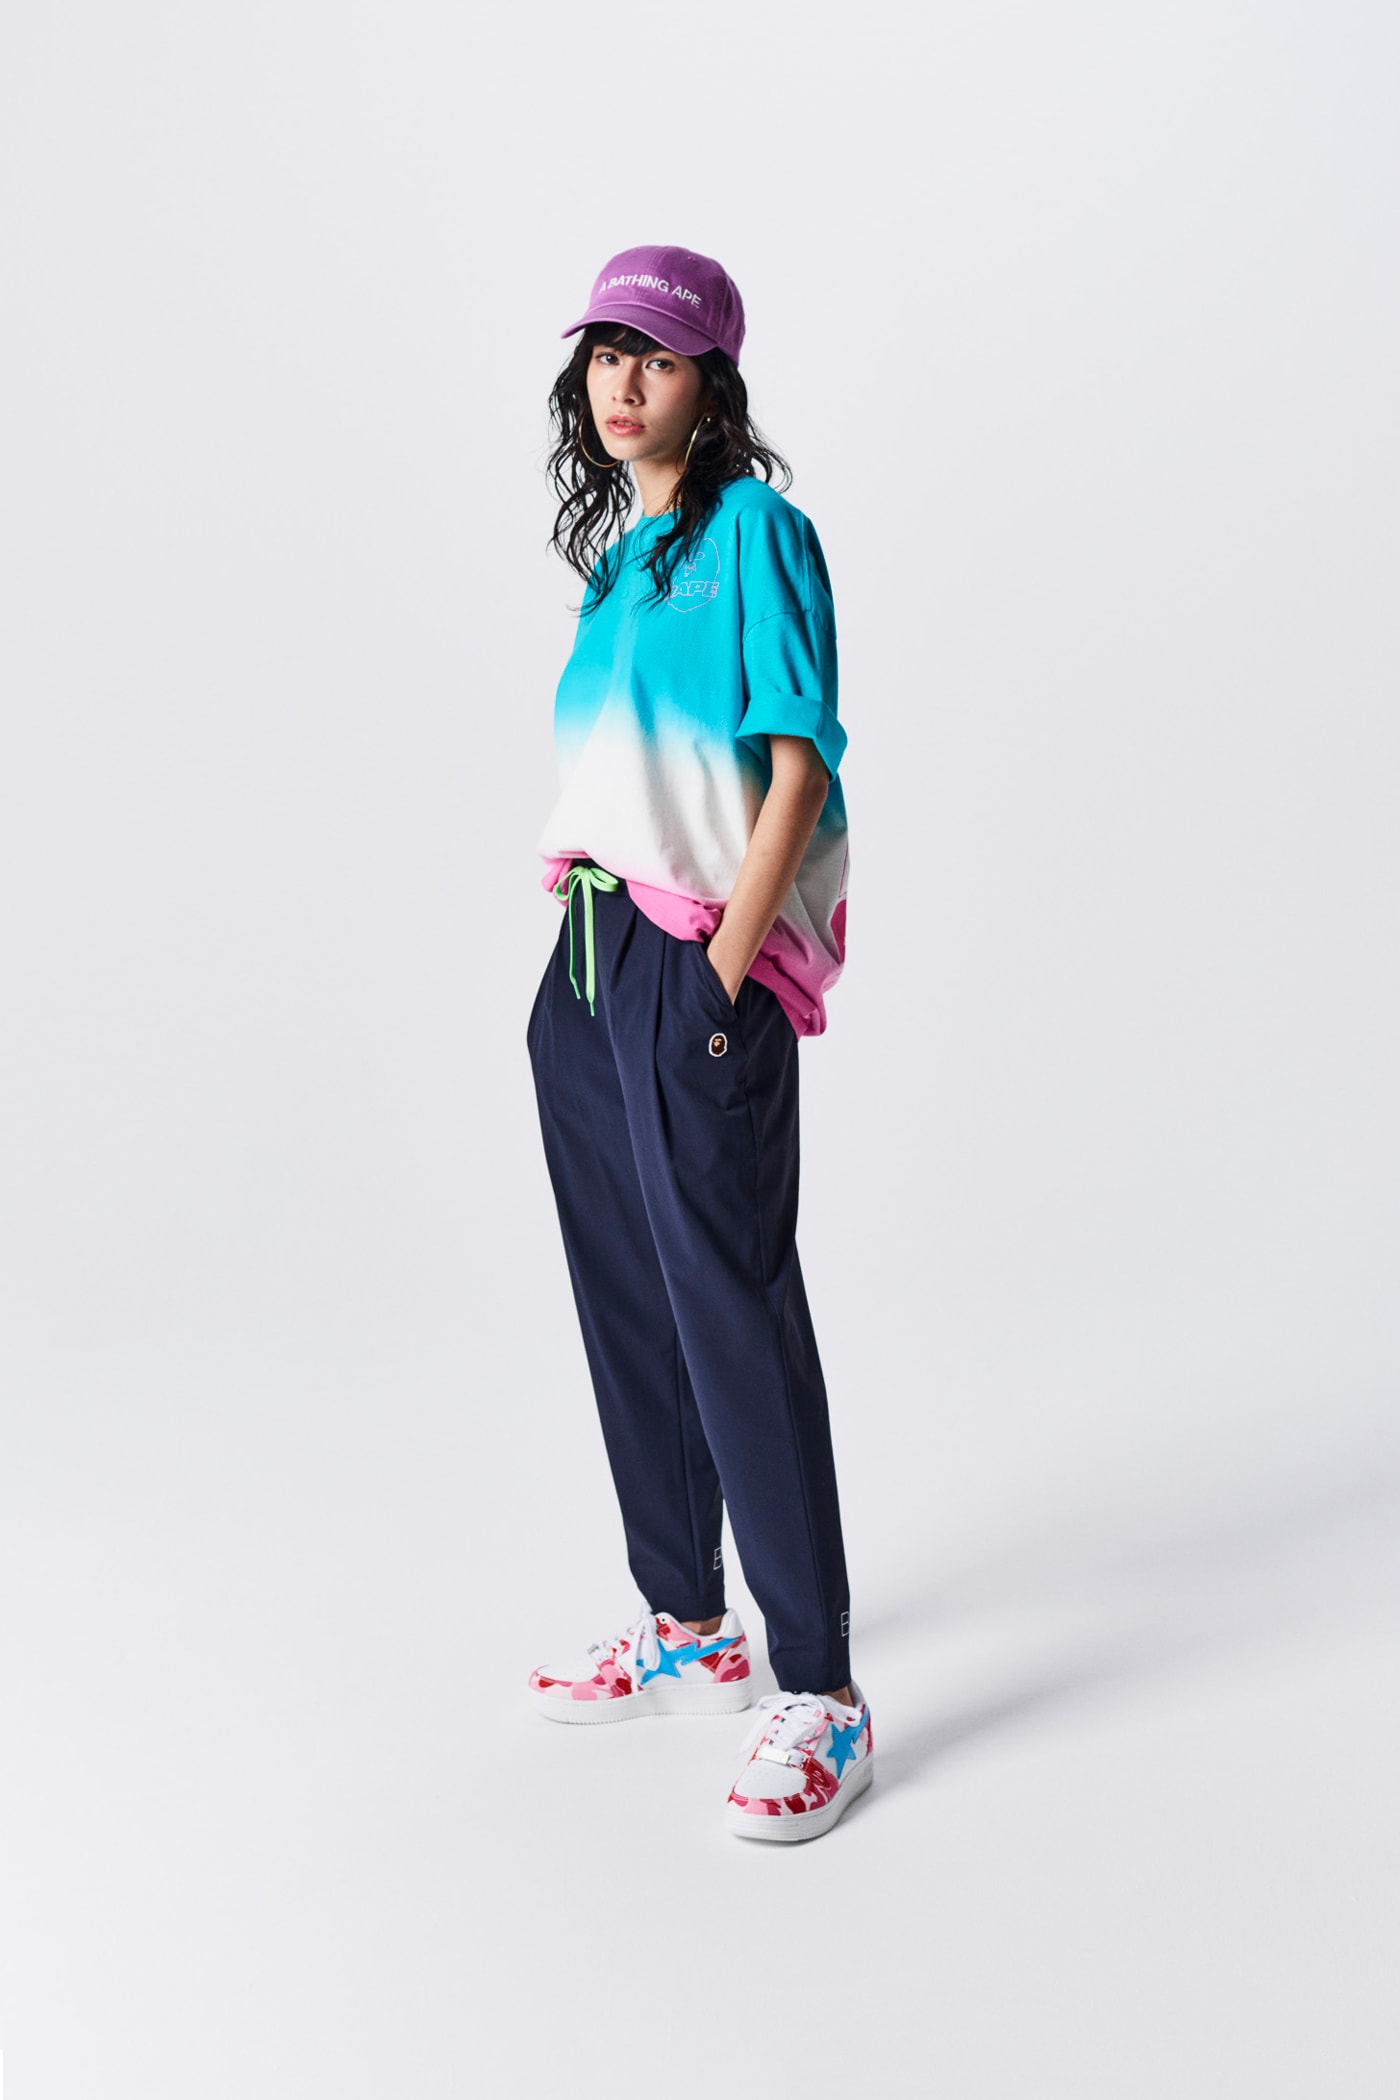 A Bathing Ape Spring Summer 2019 Collection Lookbook Shirt Teal Pants Blue